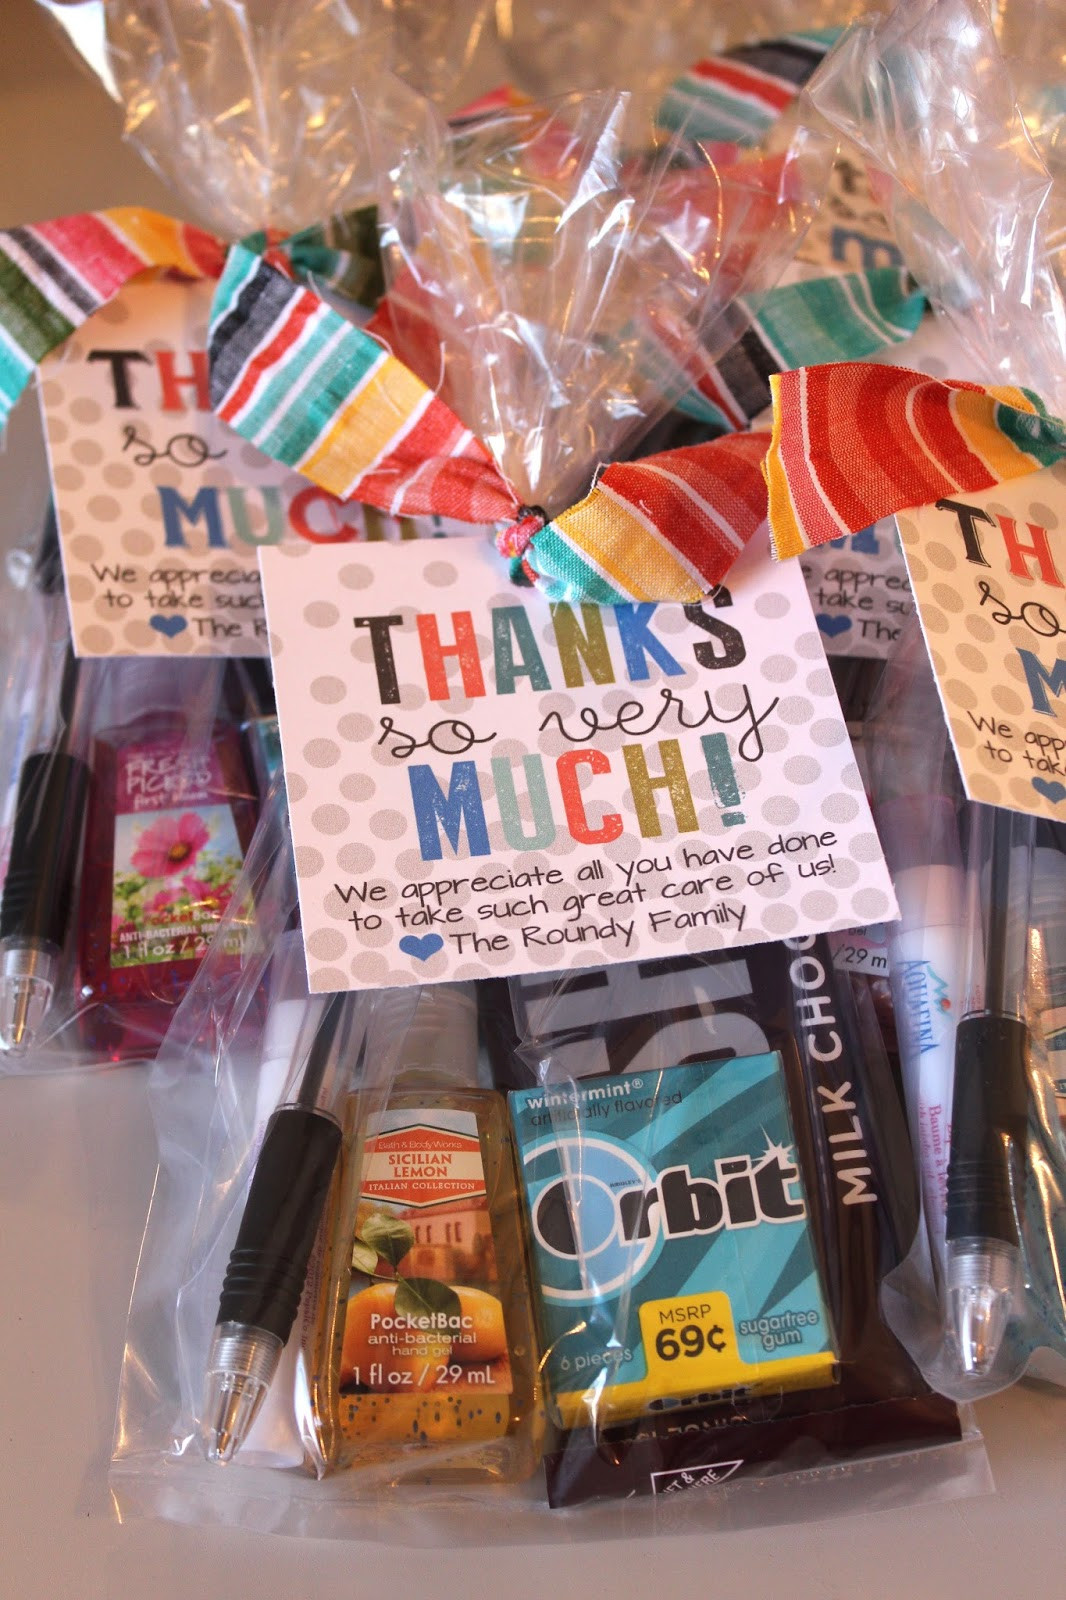 The 22 Best Ideas for Thank You Gift Baskets Ideas Home, Family